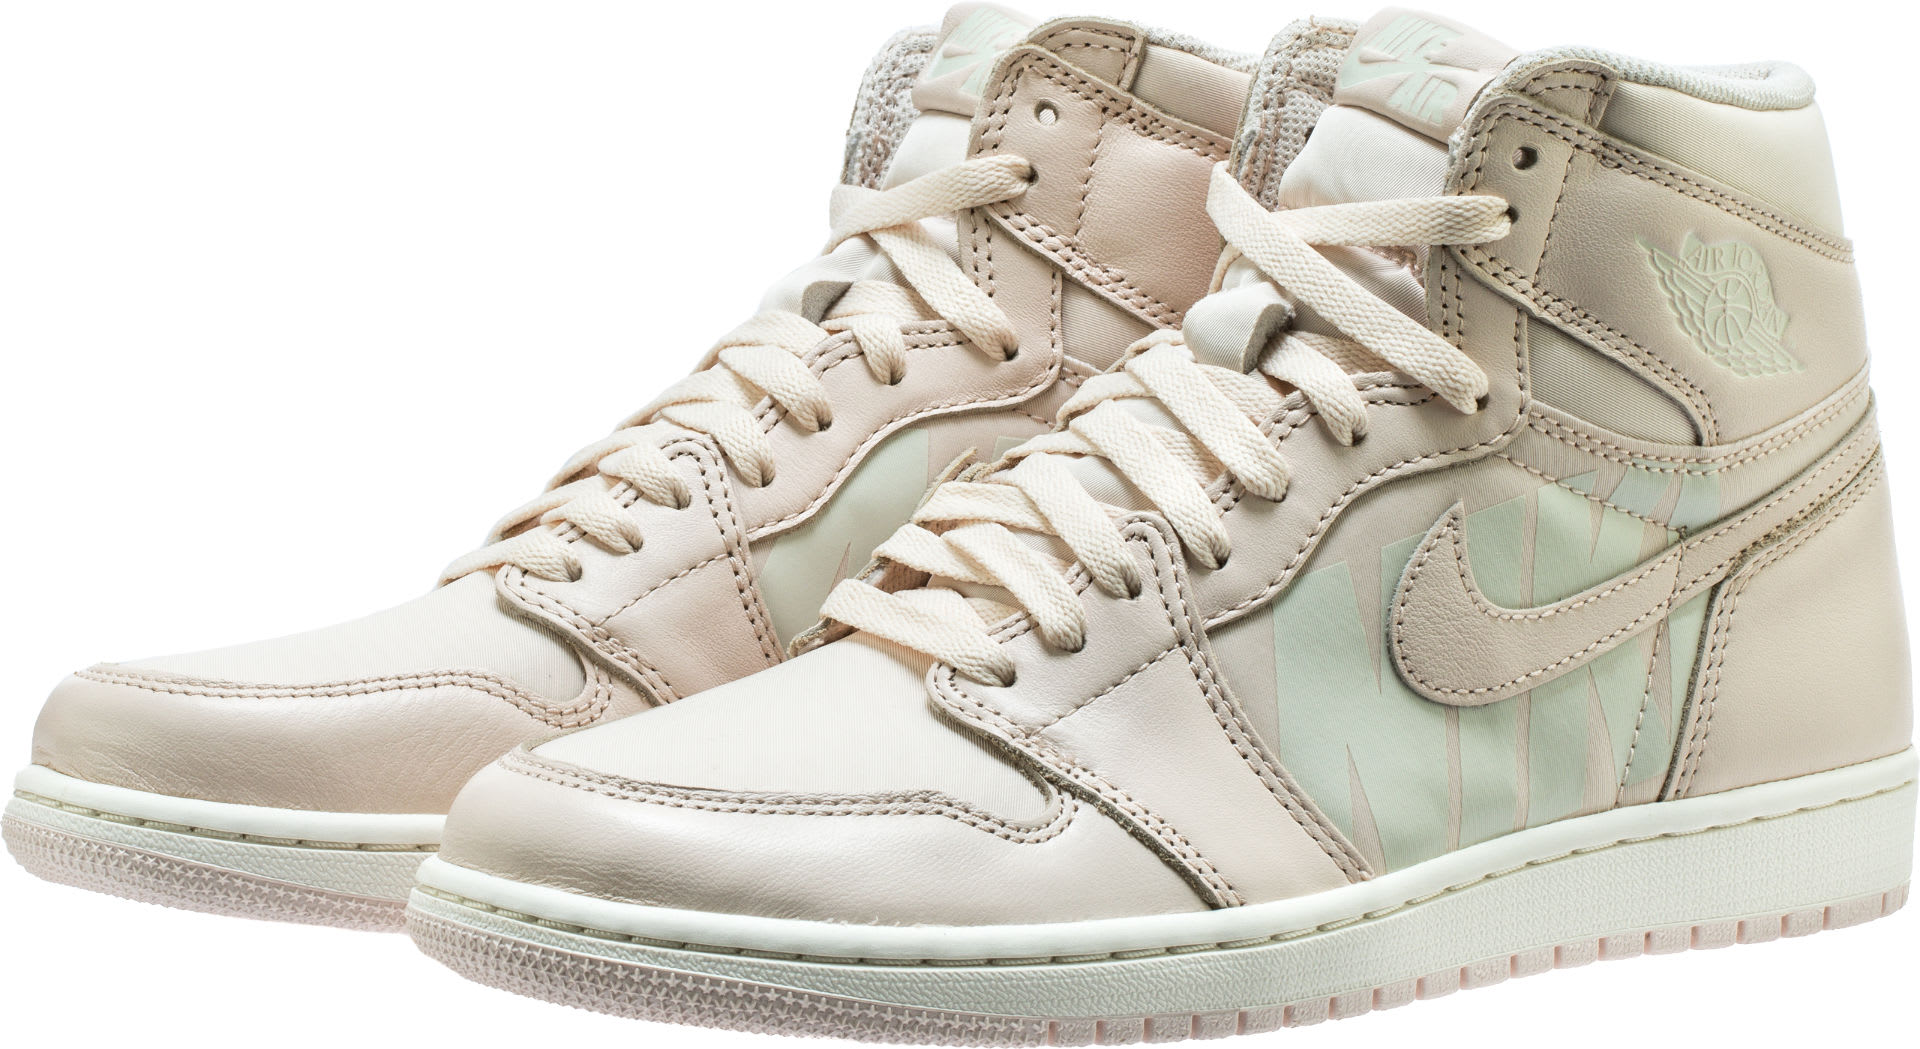 Air Jordan 1 High Guava Ice Sail Release Date 555088-801 Front